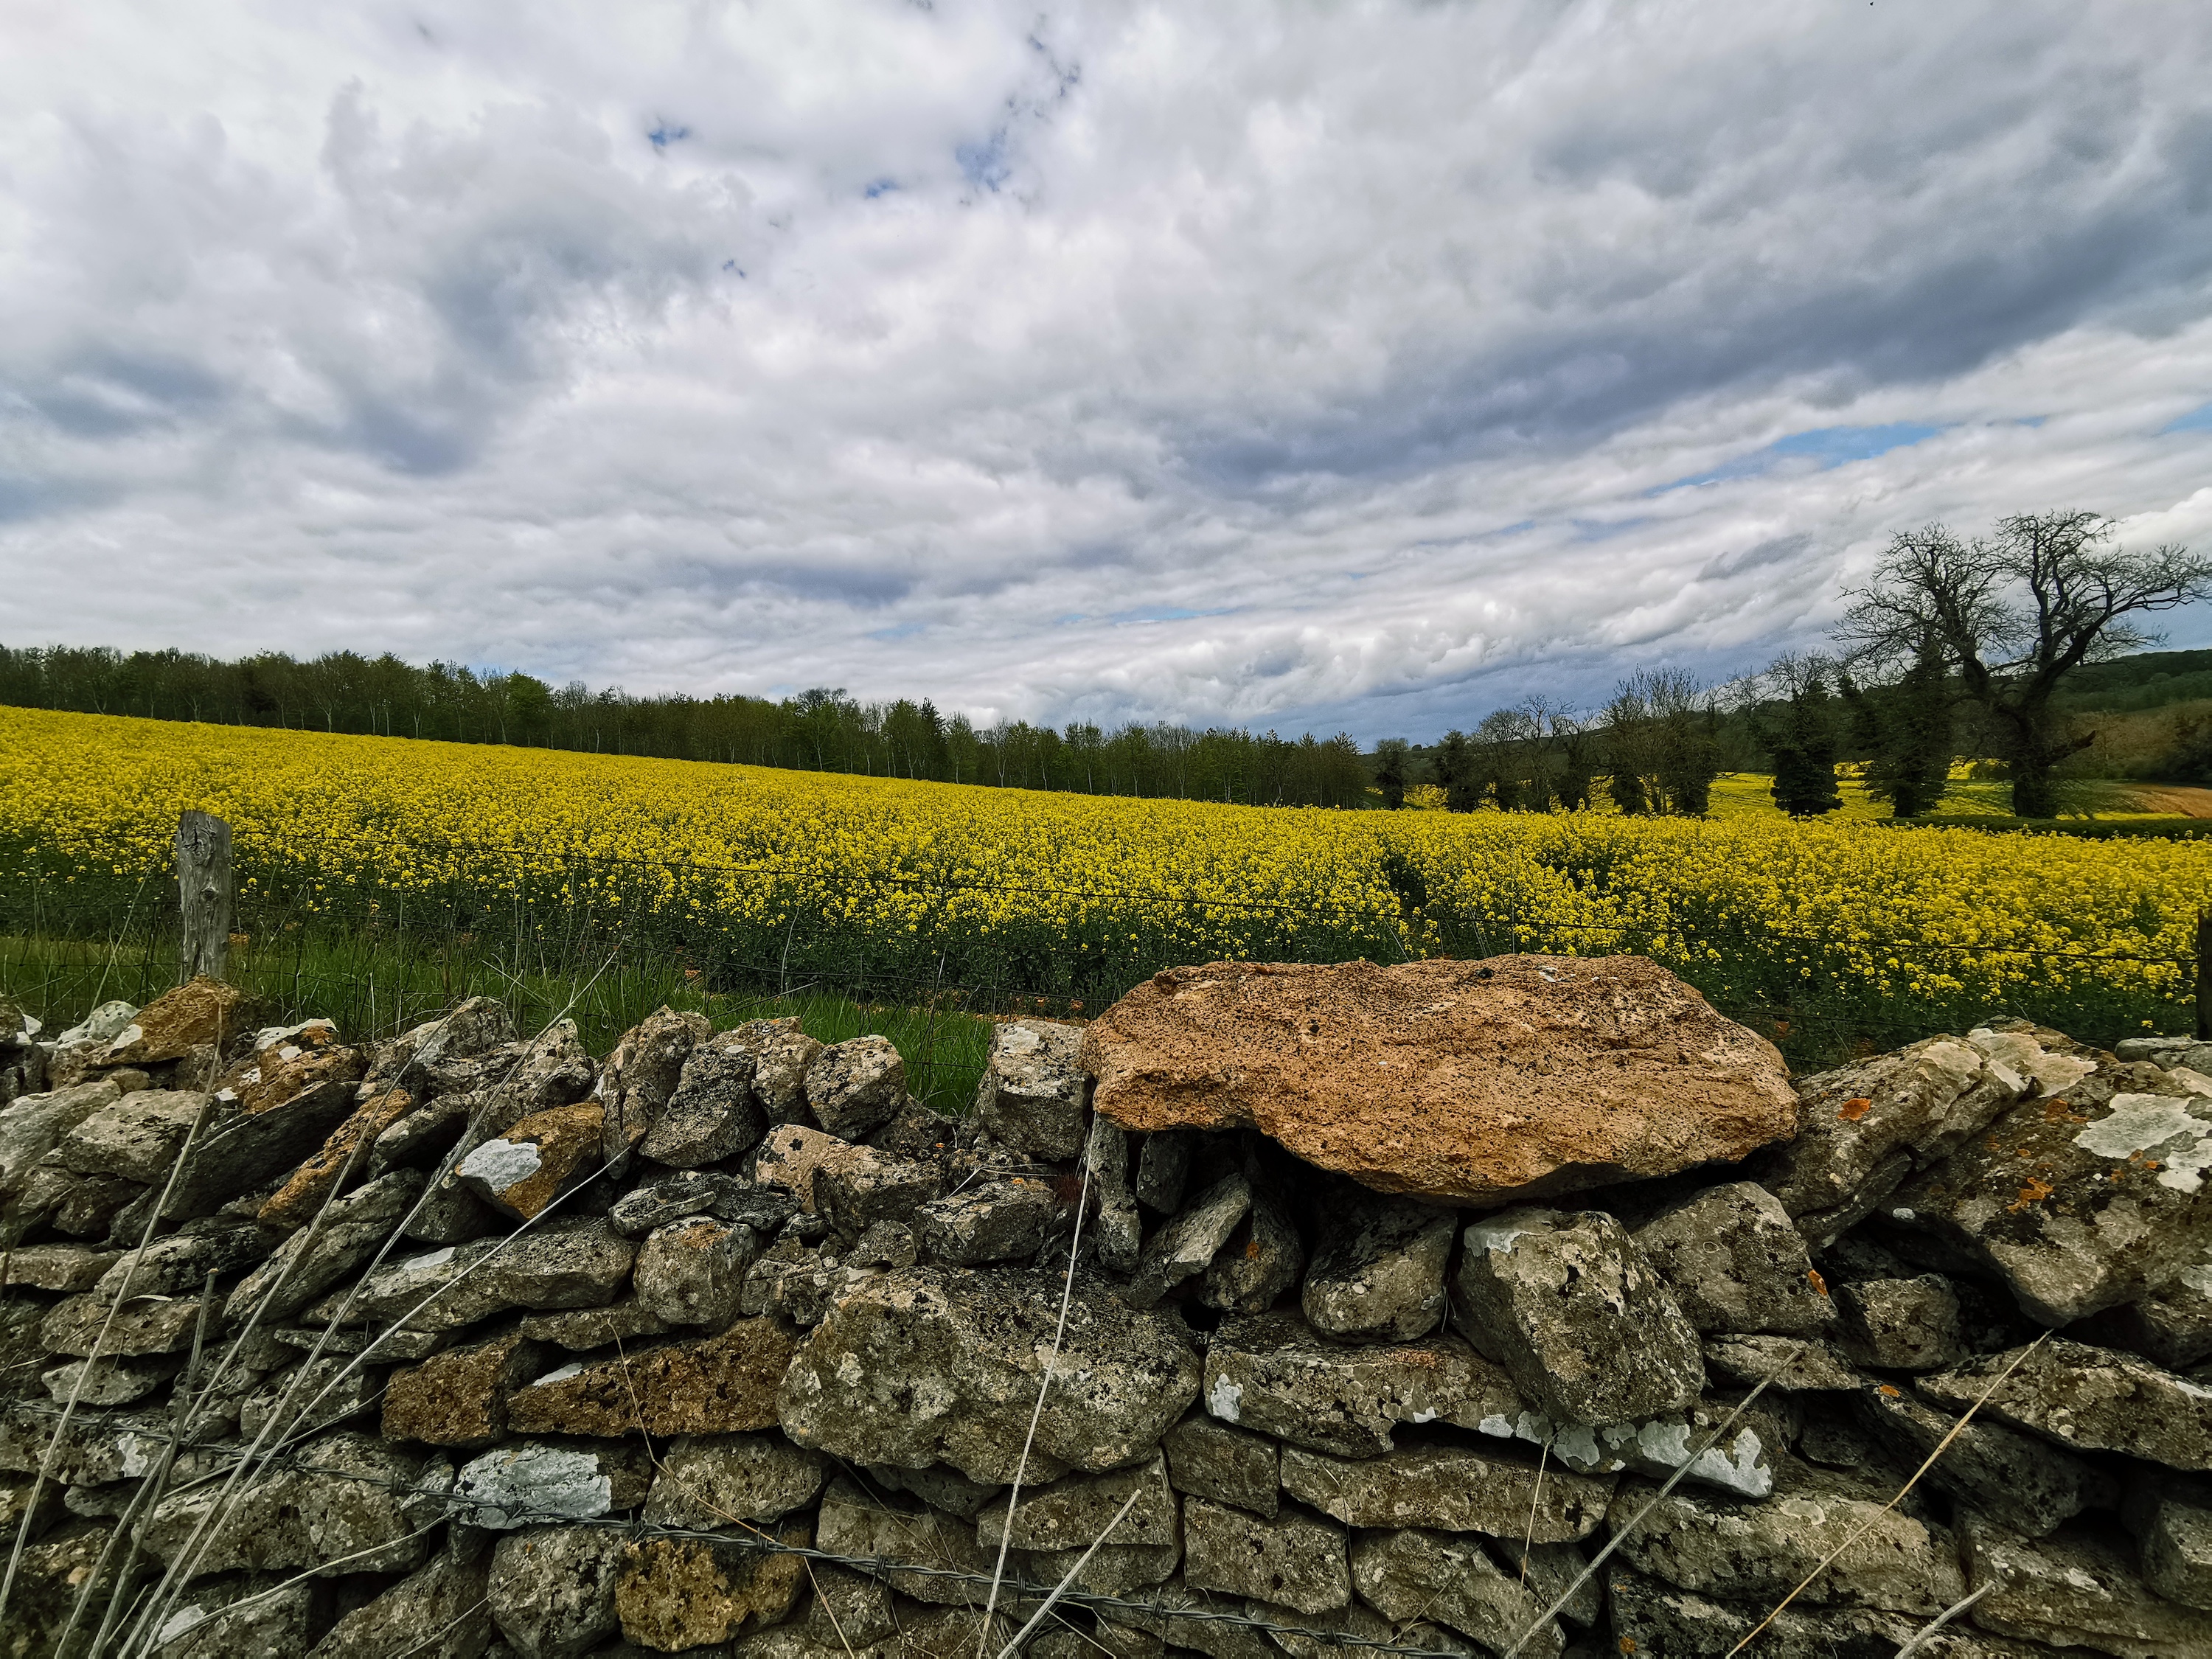 A countryside scene taken with the Huawei P30 Pro.